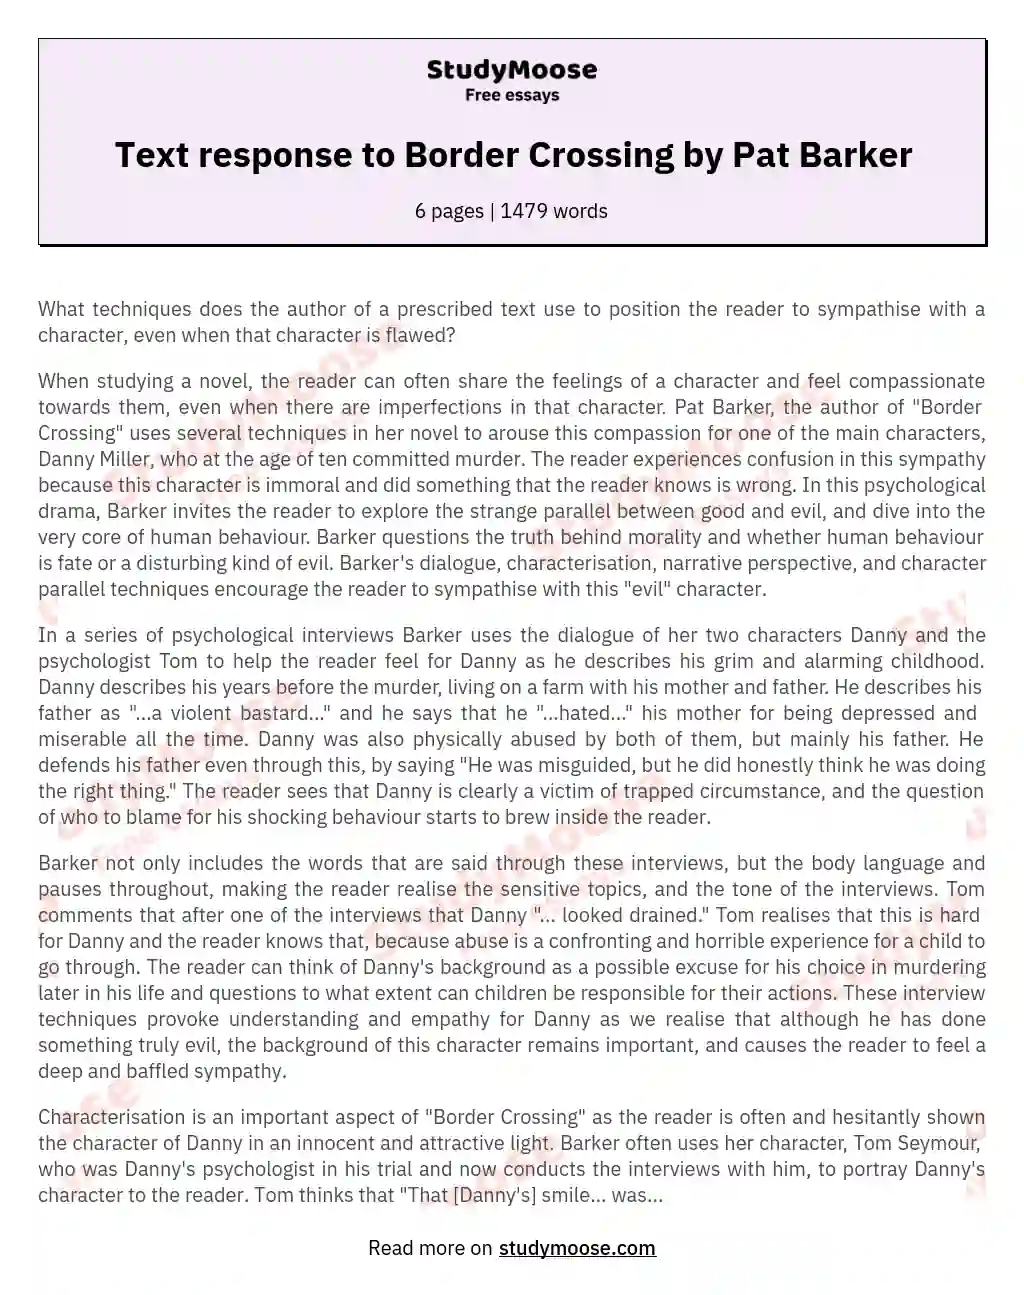 Text response to Border Crossing by Pat Barker